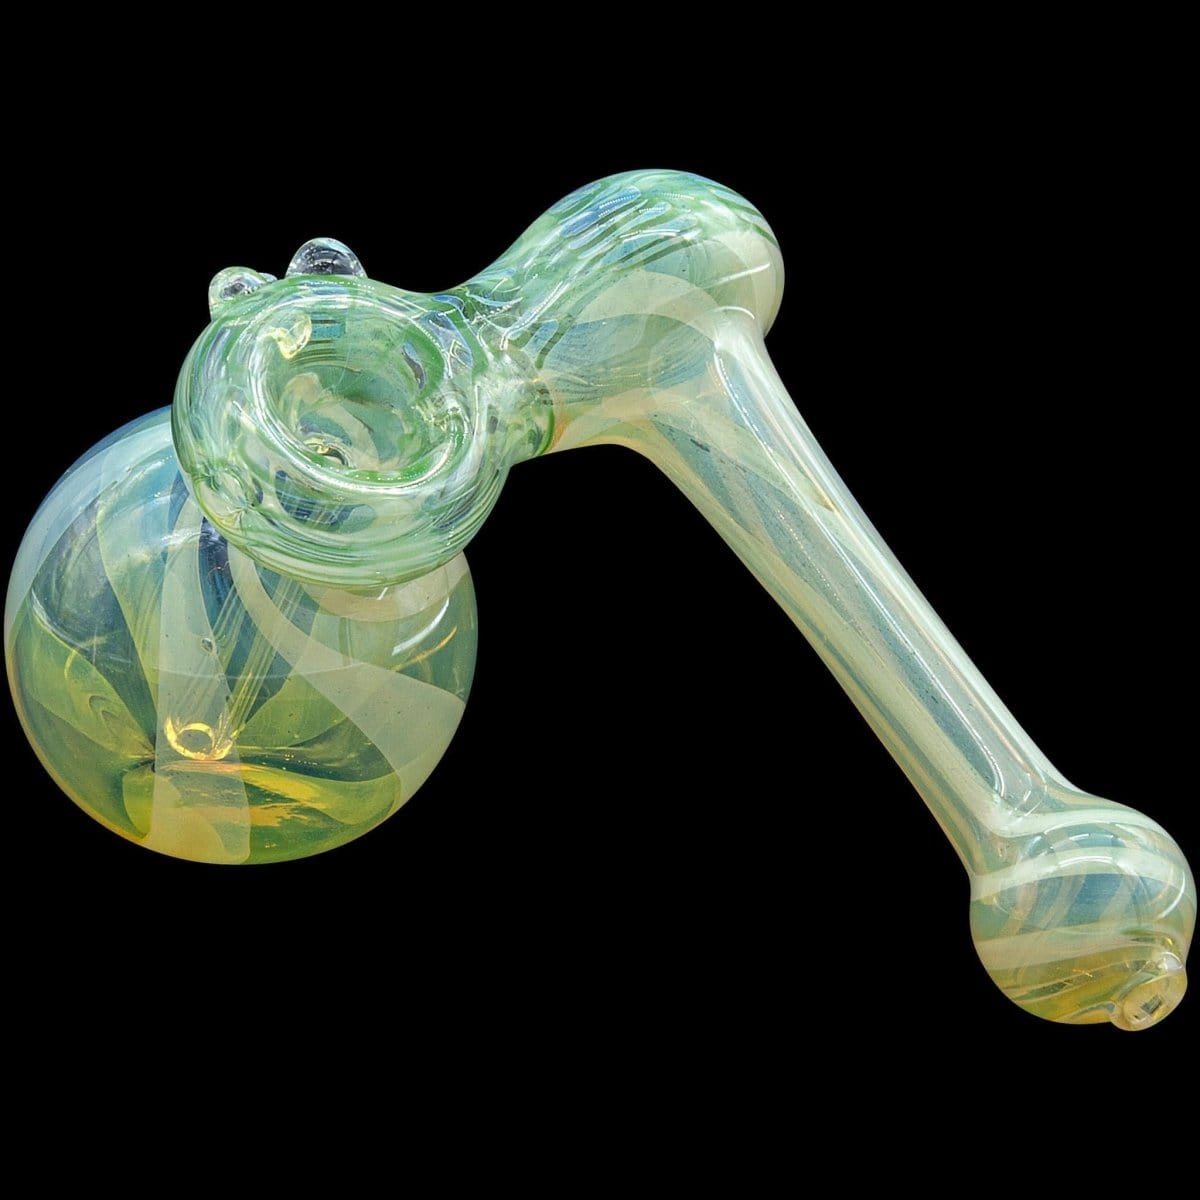 LA Pipes Bubbler Forest Green "Raked Sidecar" Fumed Sidecar Bubbler Pipe (Various Colors)